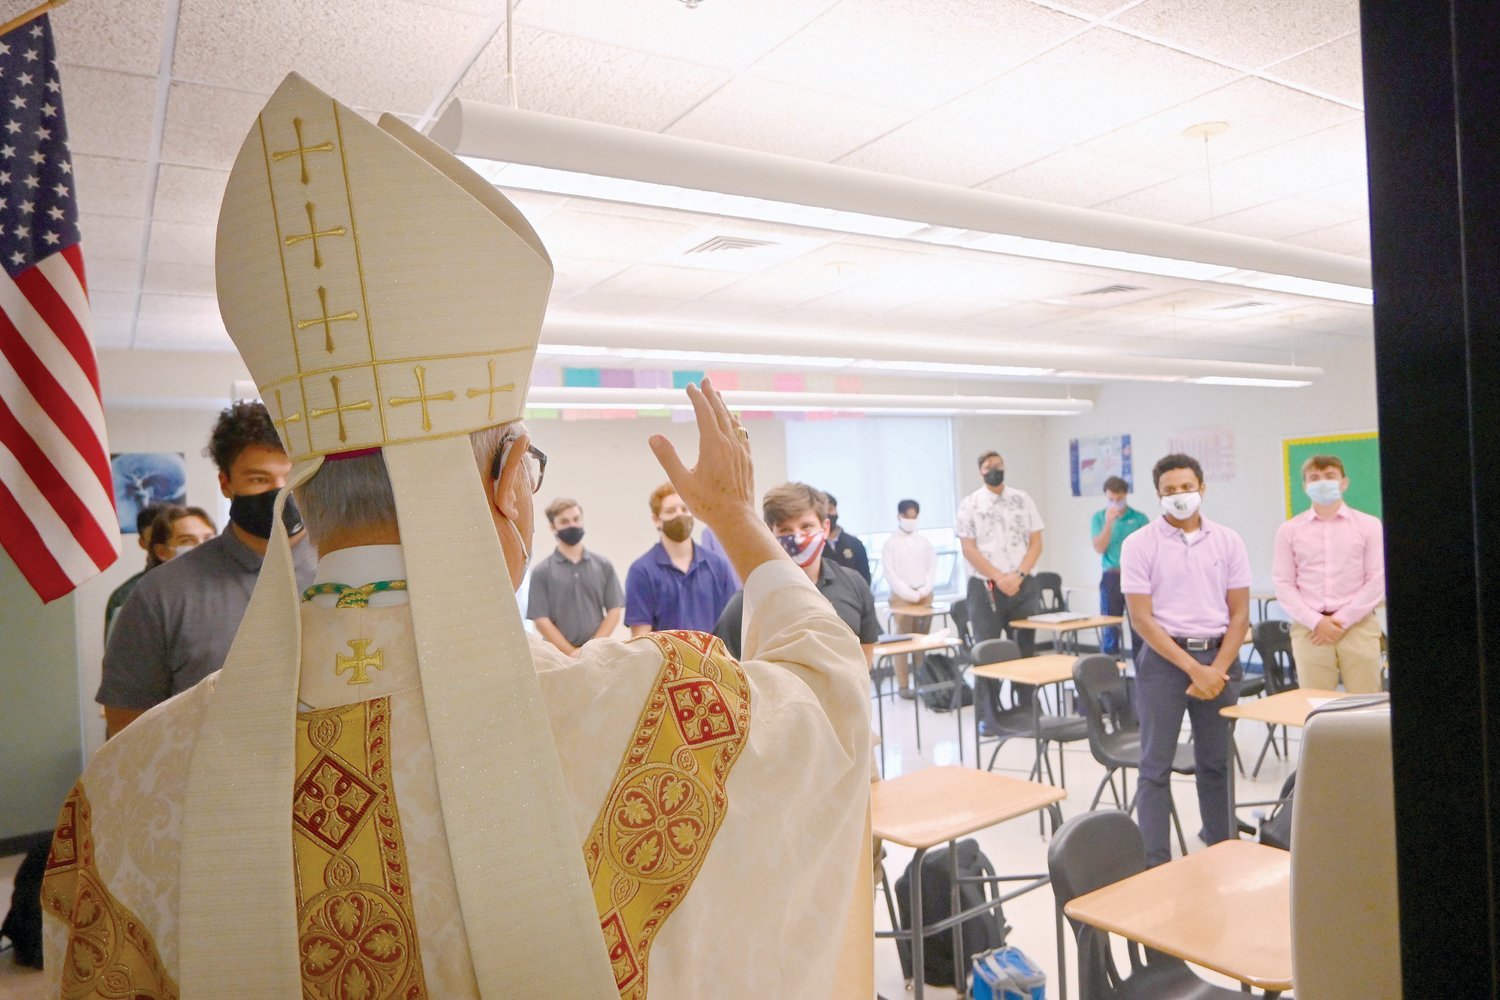 After celebrating Bishop Hendricken High School’s opening of school Mass on September 29, Bishop Tobin visited campus to chat with students and bless classrooms, even receiving a special gift from seniors in the Options Program.